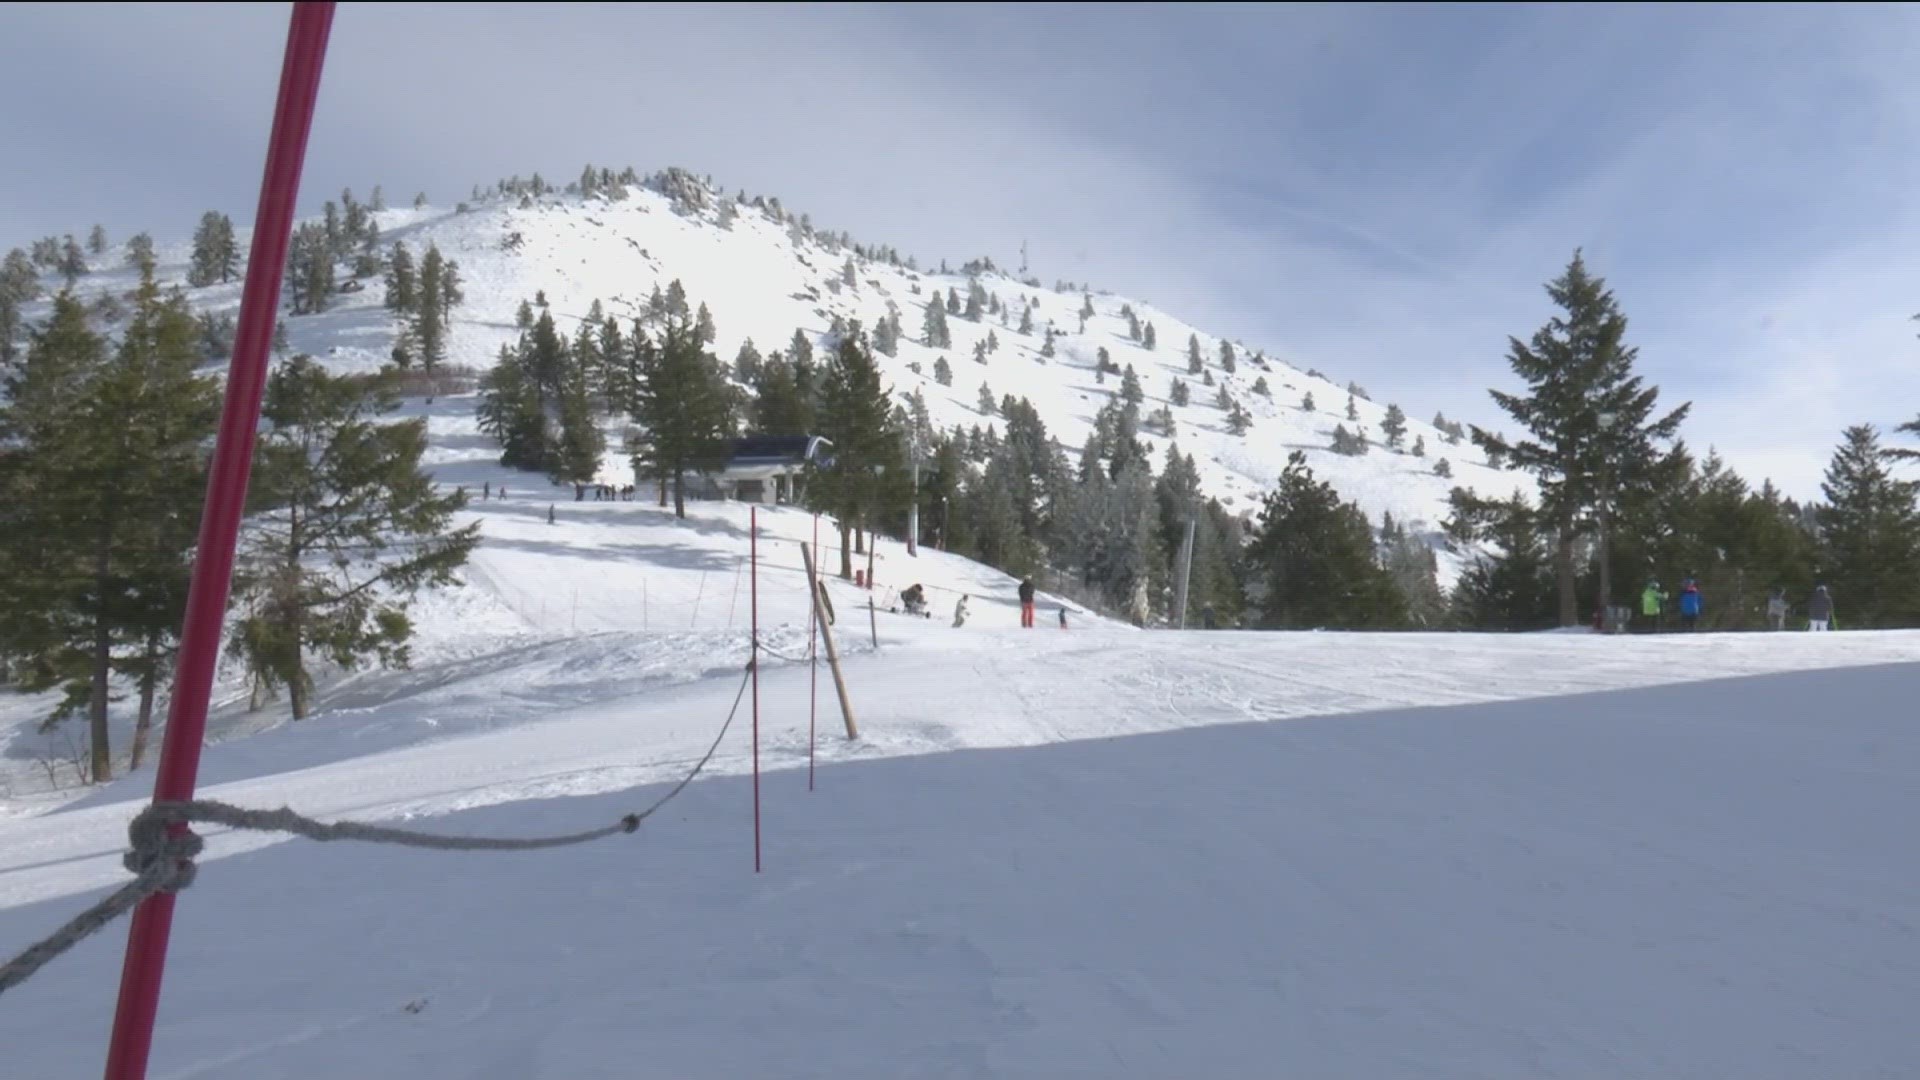 The upcoming weekend will be the last time skiers can hit the slopes at the mountains before the end of the season.